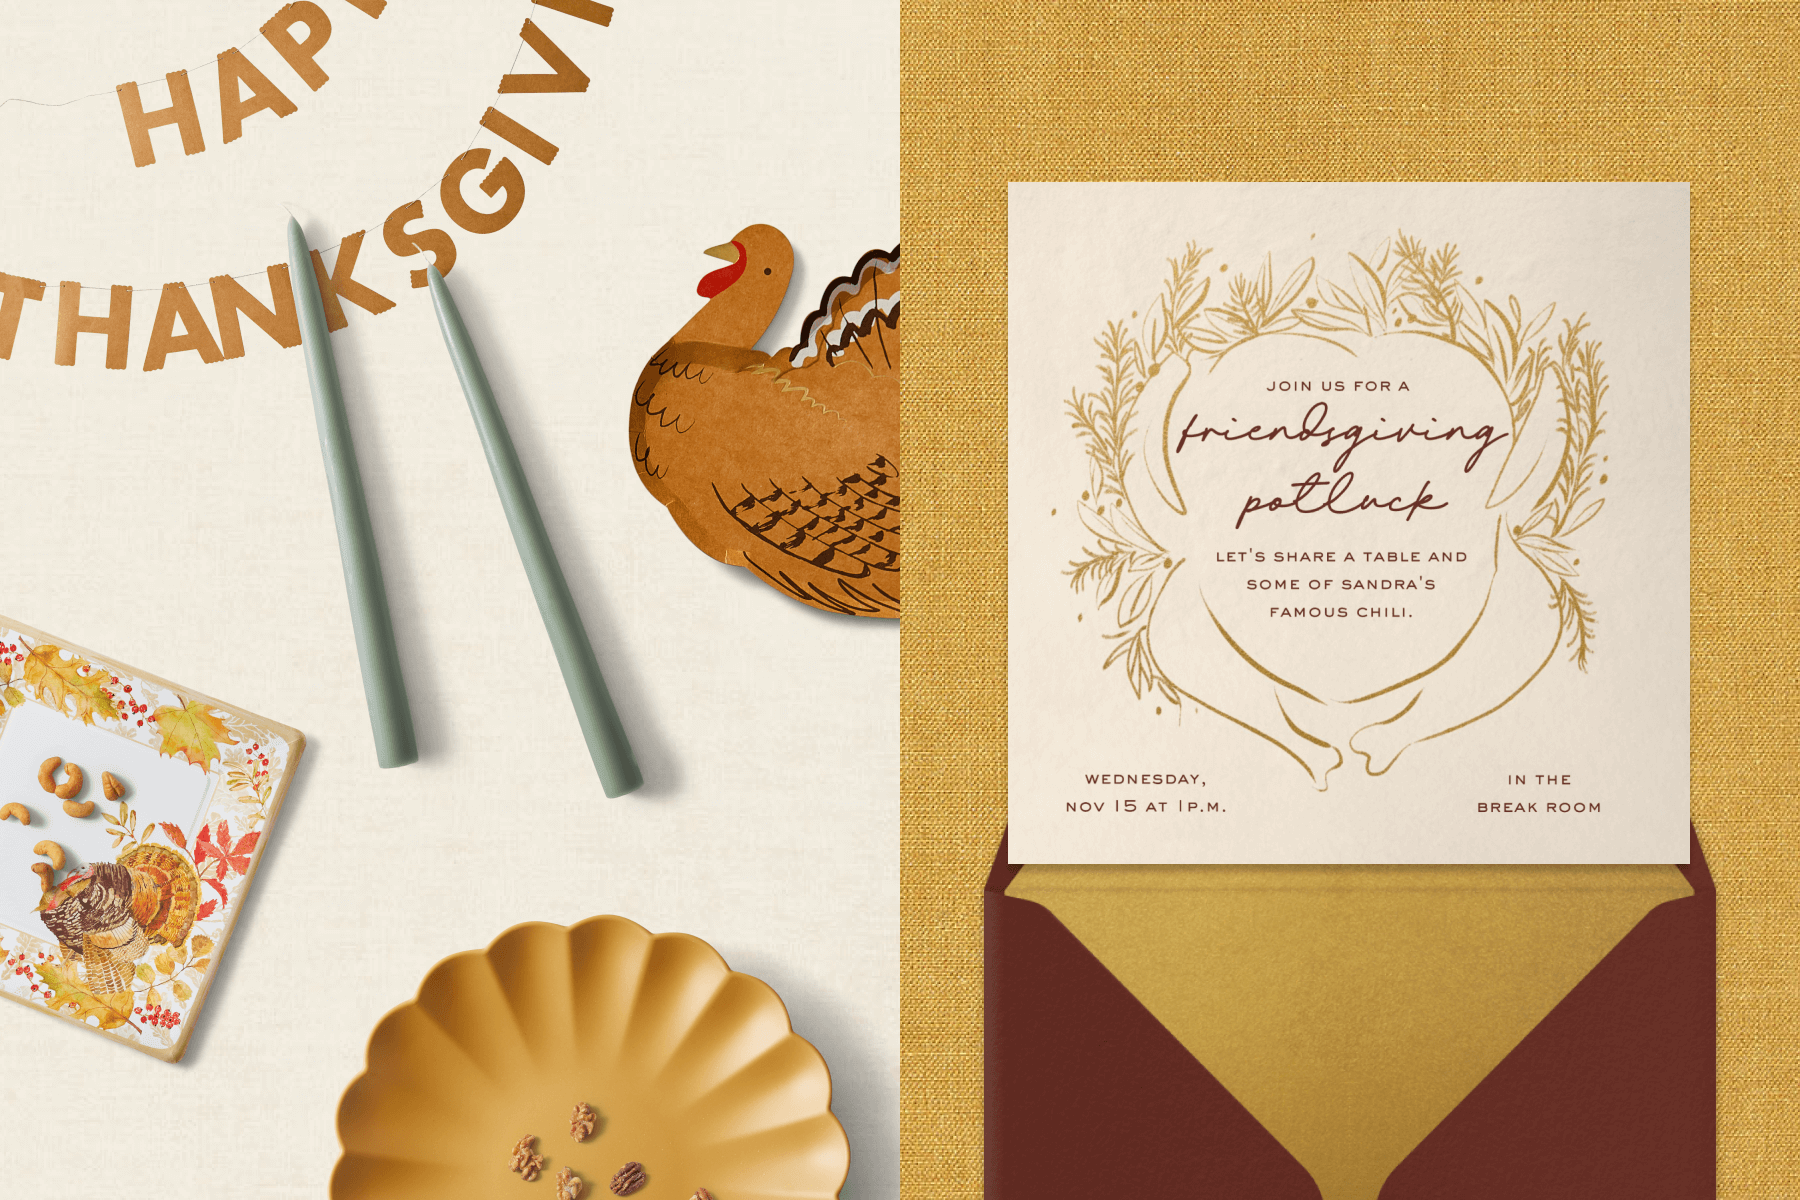 Left: A happy Thanksgiving banner, green taper candles, turkey plate, and scalloped plate. Right: A square Friendsgiving potluck invitation with a gold outline of a roast turkey.